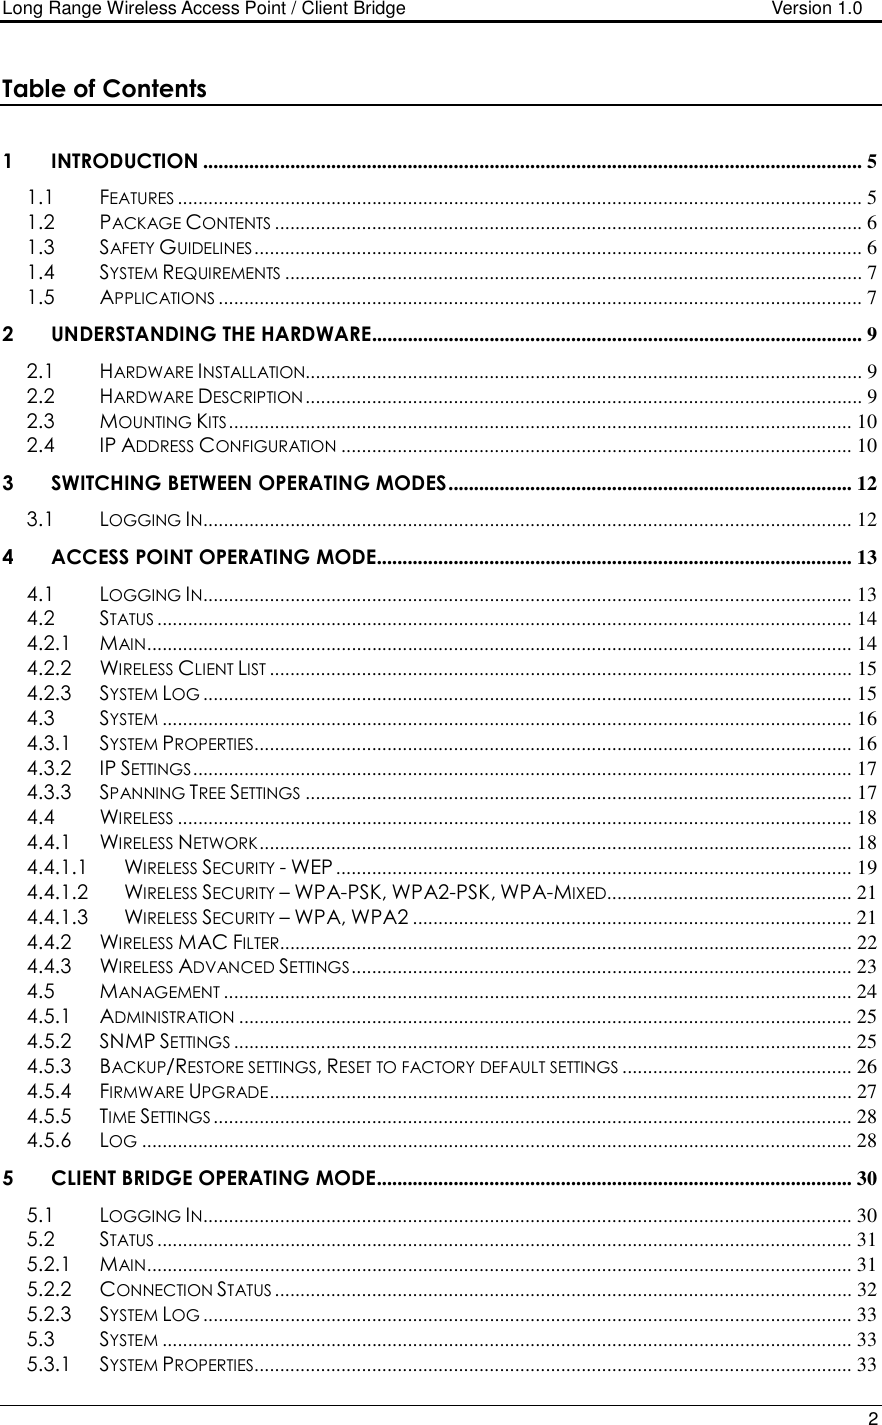 Long Range Wireless Access Point / Client Bridge                                   Version 1.0    2  Table of Contents  1 INTRODUCTION ................................................................................................................................. 5 1.1 FEATURES...................................................................................................................................... 5 1.2 PACKAGE CONTENTS................................................................................................................... 6 1.3 SAFETY GUIDELINES....................................................................................................................... 6 1.4 SYSTEM REQUIREMENTS................................................................................................................. 7 1.5 APPLICATIONS.............................................................................................................................. 7 2 UNDERSTANDING THE HARDWARE................................................................................................ 9 2.1 HARDWARE INSTALLATION............................................................................................................. 9 2.2 HARDWARE DESCRIPTION............................................................................................................. 9 2.3 MOUNTING KITS.......................................................................................................................... 10 2.4 IP ADDRESS CONFIGURATION.................................................................................................... 10 3 SWITCHING BETWEEN OPERATING MODES............................................................................... 12 3.1 LOGGING IN............................................................................................................................... 12 4 ACCESS POINT OPERATING MODE............................................................................................. 13 4.1 LOGGING IN............................................................................................................................... 13 4.2 STATUS........................................................................................................................................ 14 4.2.1 MAIN.......................................................................................................................................... 14 4.2.2 WIRELESS CLIENT LIST.................................................................................................................. 15 4.2.3 SYSTEM LOG............................................................................................................................... 15 4.3 SYSTEM....................................................................................................................................... 16 4.3.1 SYSTEM PROPERTIES..................................................................................................................... 16 4.3.2 IP SETTINGS................................................................................................................................. 17 4.3.3 SPANNING TREE SETTINGS........................................................................................................... 17 4.4 WIRELESS.................................................................................................................................... 18 4.4.1 WIRELESS NETWORK.................................................................................................................... 18 4.4.1.1 WIRELESS SECURITY - WEP ..................................................................................................... 19 4.4.1.2 WIRELESS SECURITY – WPA-PSK, WPA2-PSK, WPA-MIXED................................................ 21 4.4.1.3 WIRELESS SECURITY – WPA, WPA2 ...................................................................................... 21 4.4.2 WIRELESS MAC FILTER................................................................................................................ 22 4.4.3 WIRELESS ADVANCED SETTINGS.................................................................................................. 23 4.5 MANAGEMENT........................................................................................................................... 24 4.5.1 ADMINISTRATION........................................................................................................................ 25 4.5.2 SNMP SETTINGS......................................................................................................................... 25 4.5.3 BACKUP/RESTORE SETTINGS, RESET TO FACTORY DEFAULT SETTINGS............................................. 26 4.5.4 FIRMWARE UPGRADE.................................................................................................................. 27 4.5.5 TIME SETTINGS............................................................................................................................. 28 4.5.6 LOG........................................................................................................................................... 28 5 CLIENT BRIDGE OPERATING MODE............................................................................................. 30 5.1 LOGGING IN............................................................................................................................... 30 5.2 STATUS........................................................................................................................................ 31 5.2.1 MAIN.......................................................................................................................................... 31 5.2.2 CONNECTION STATUS................................................................................................................. 32 5.2.3 SYSTEM LOG............................................................................................................................... 33 5.3 SYSTEM....................................................................................................................................... 33 5.3.1 SYSTEM PROPERTIES..................................................................................................................... 33 